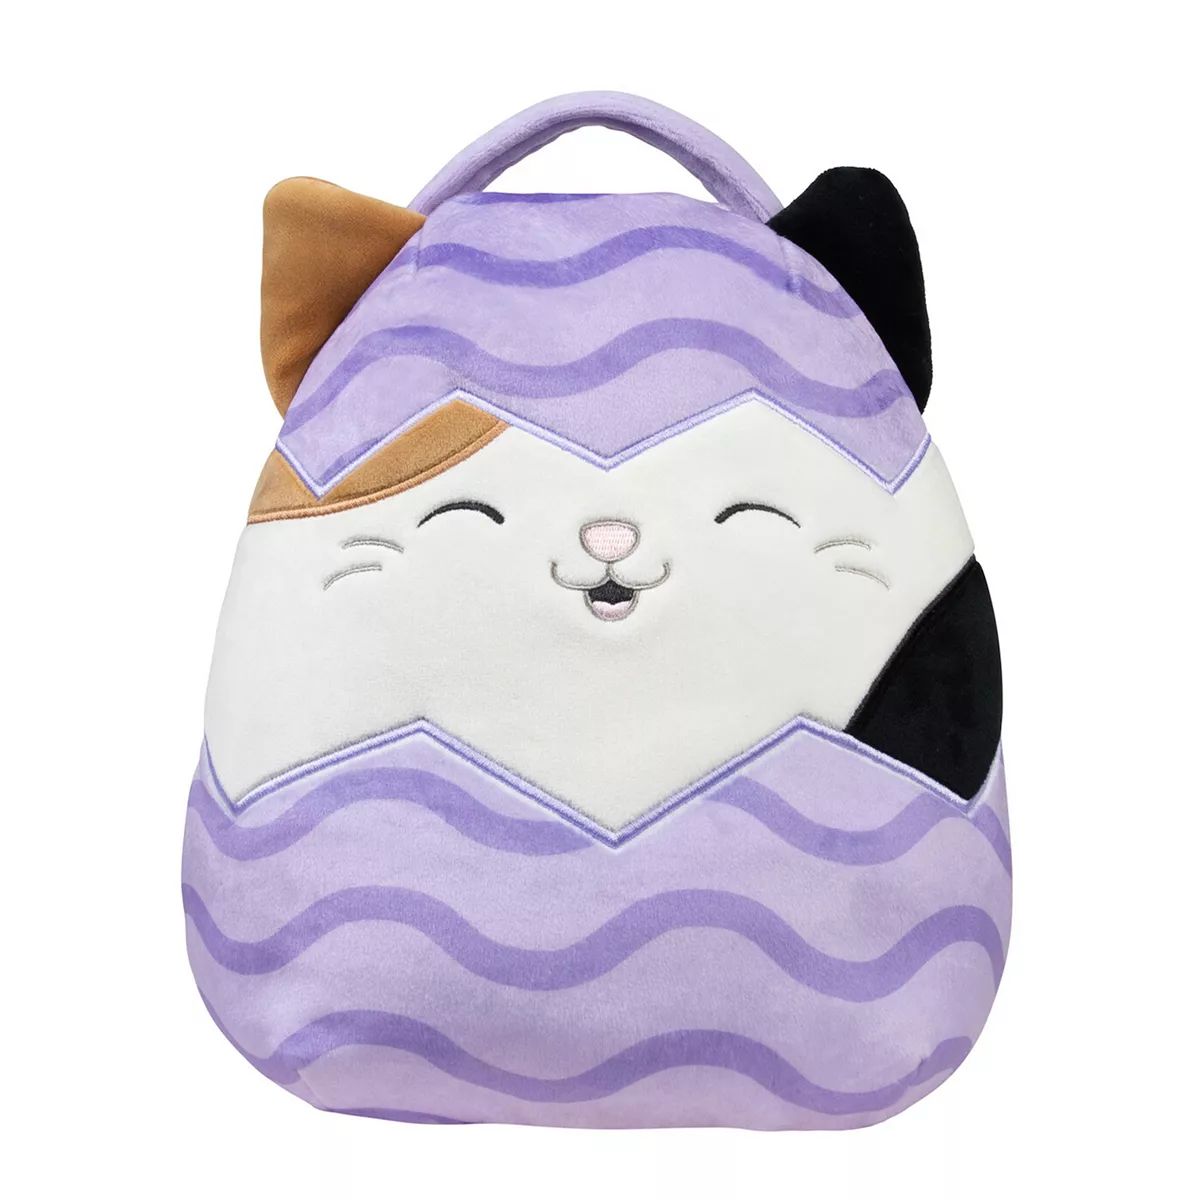 Squishmallows 12-in. Squish Cam the Cat in Easter Egg | Kohl's